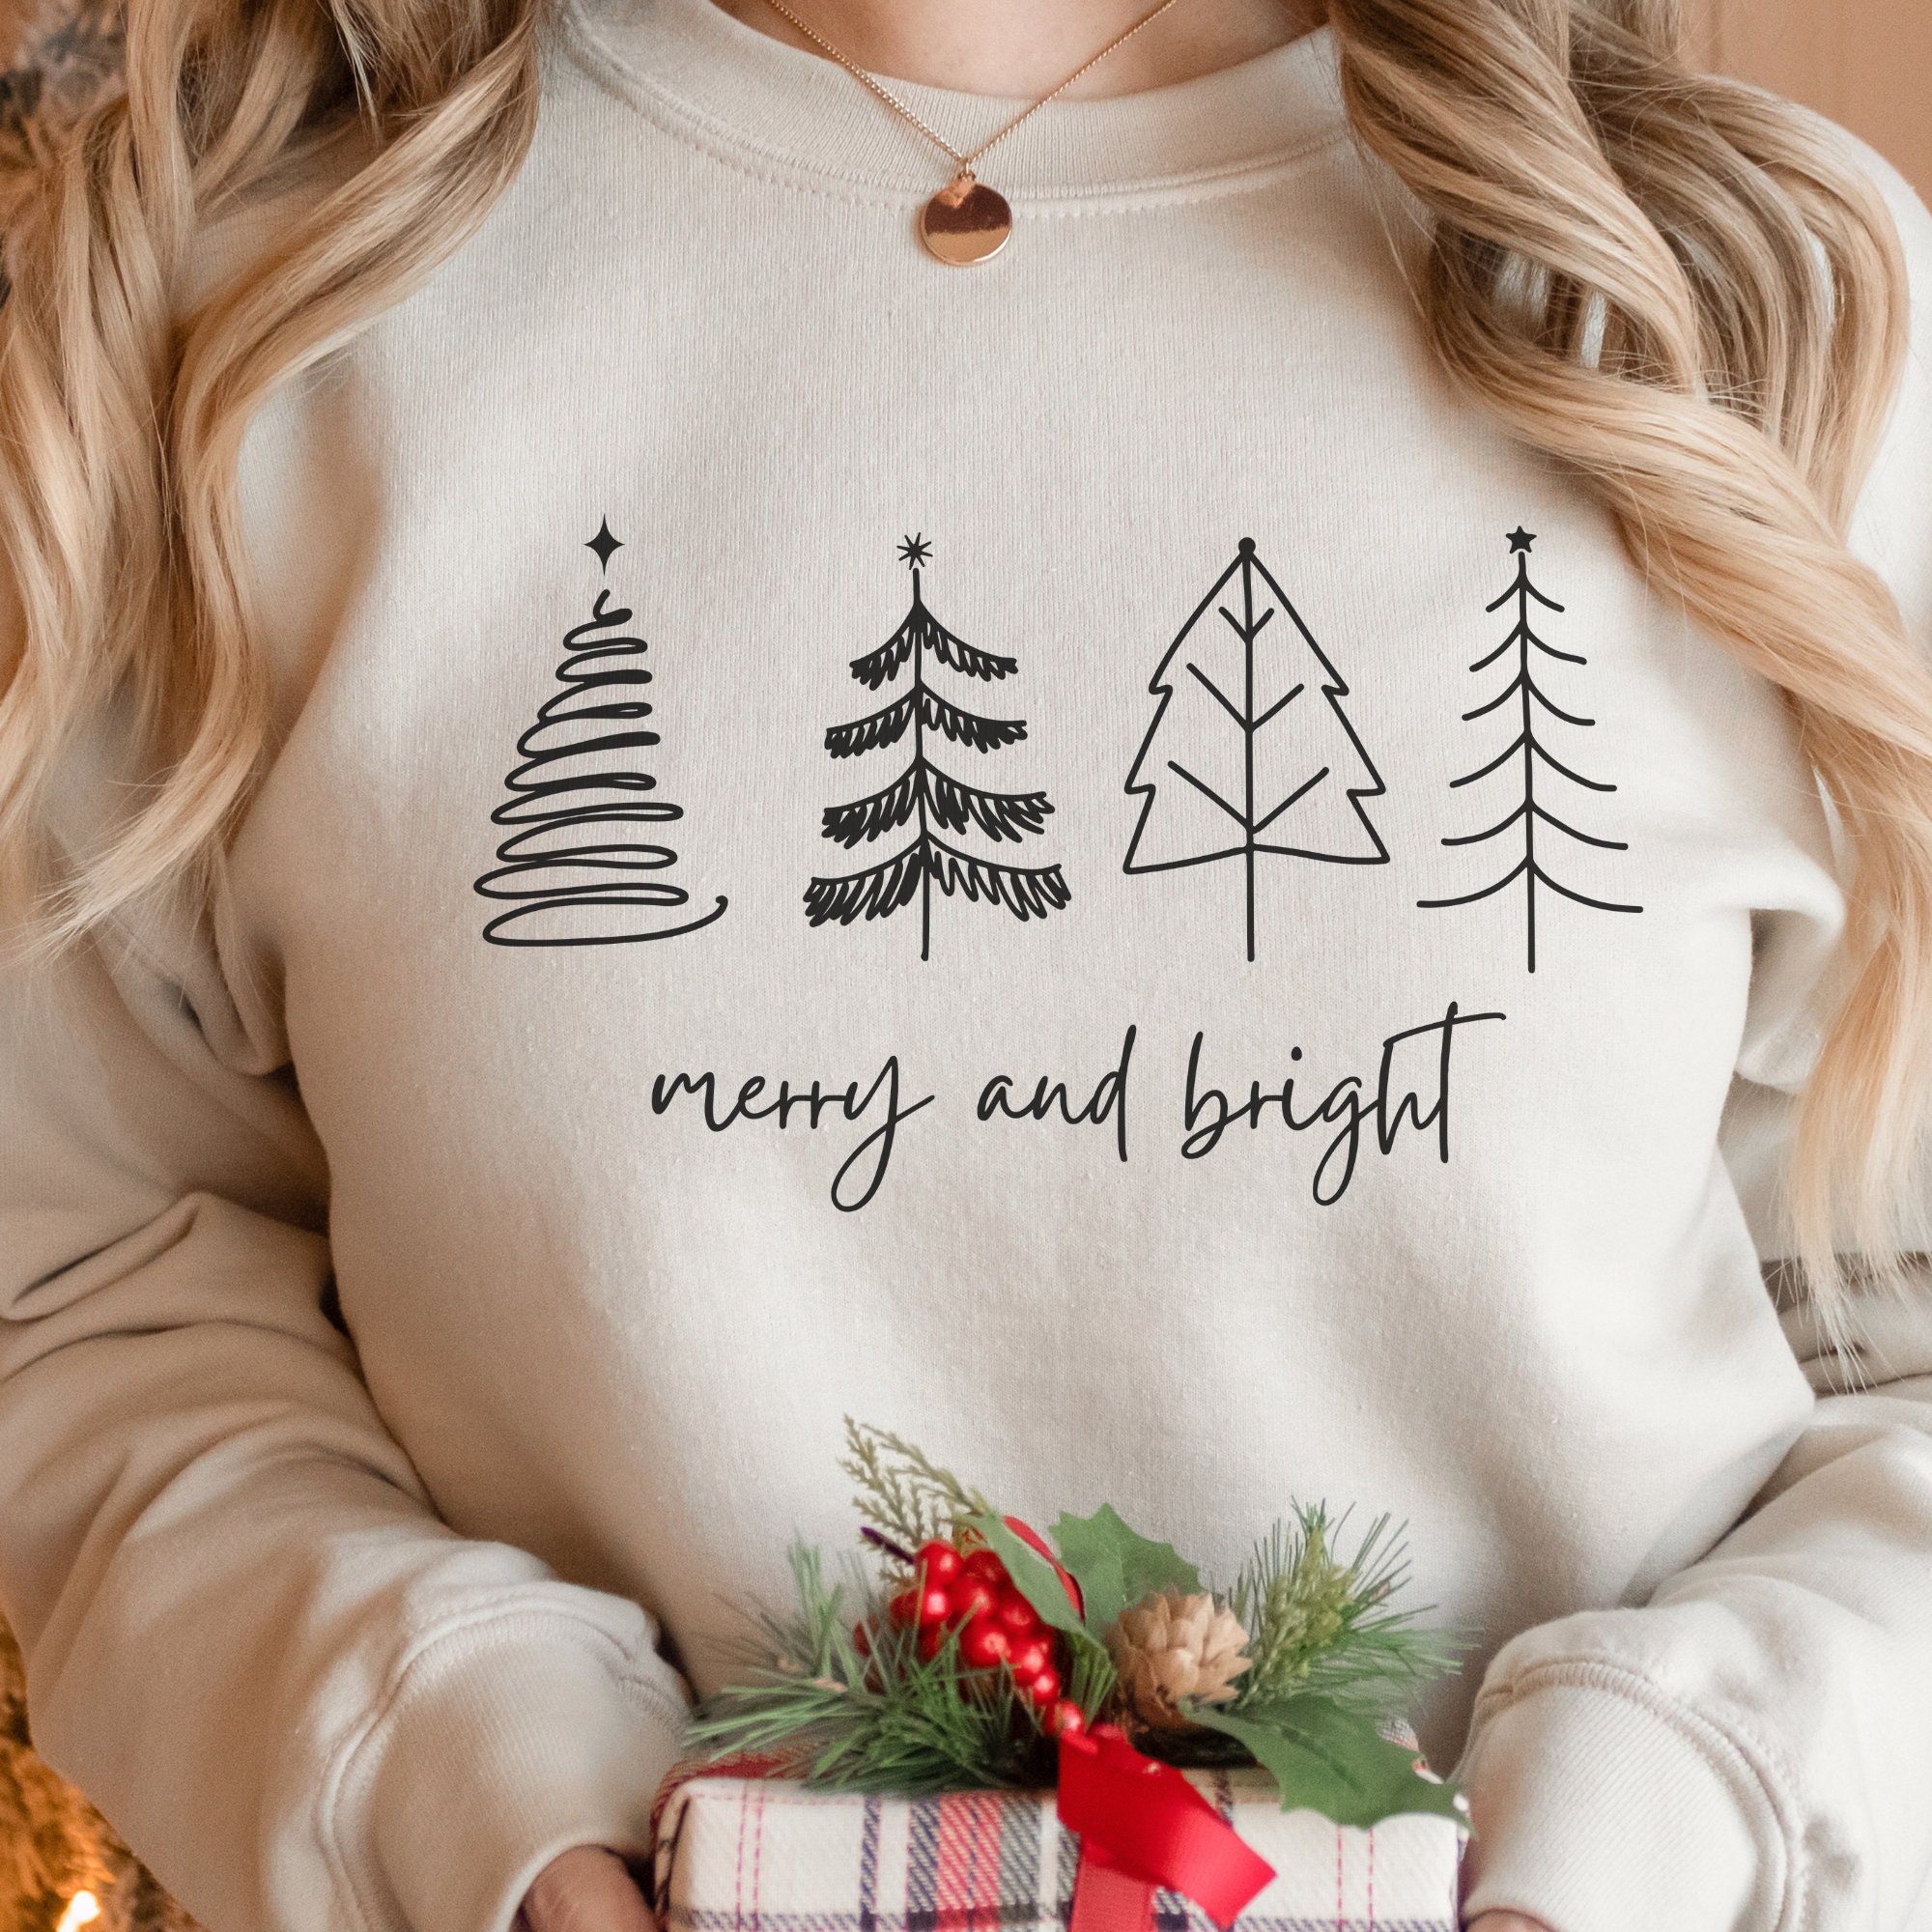 Enjoy this Christmas with Women Christmas jumper